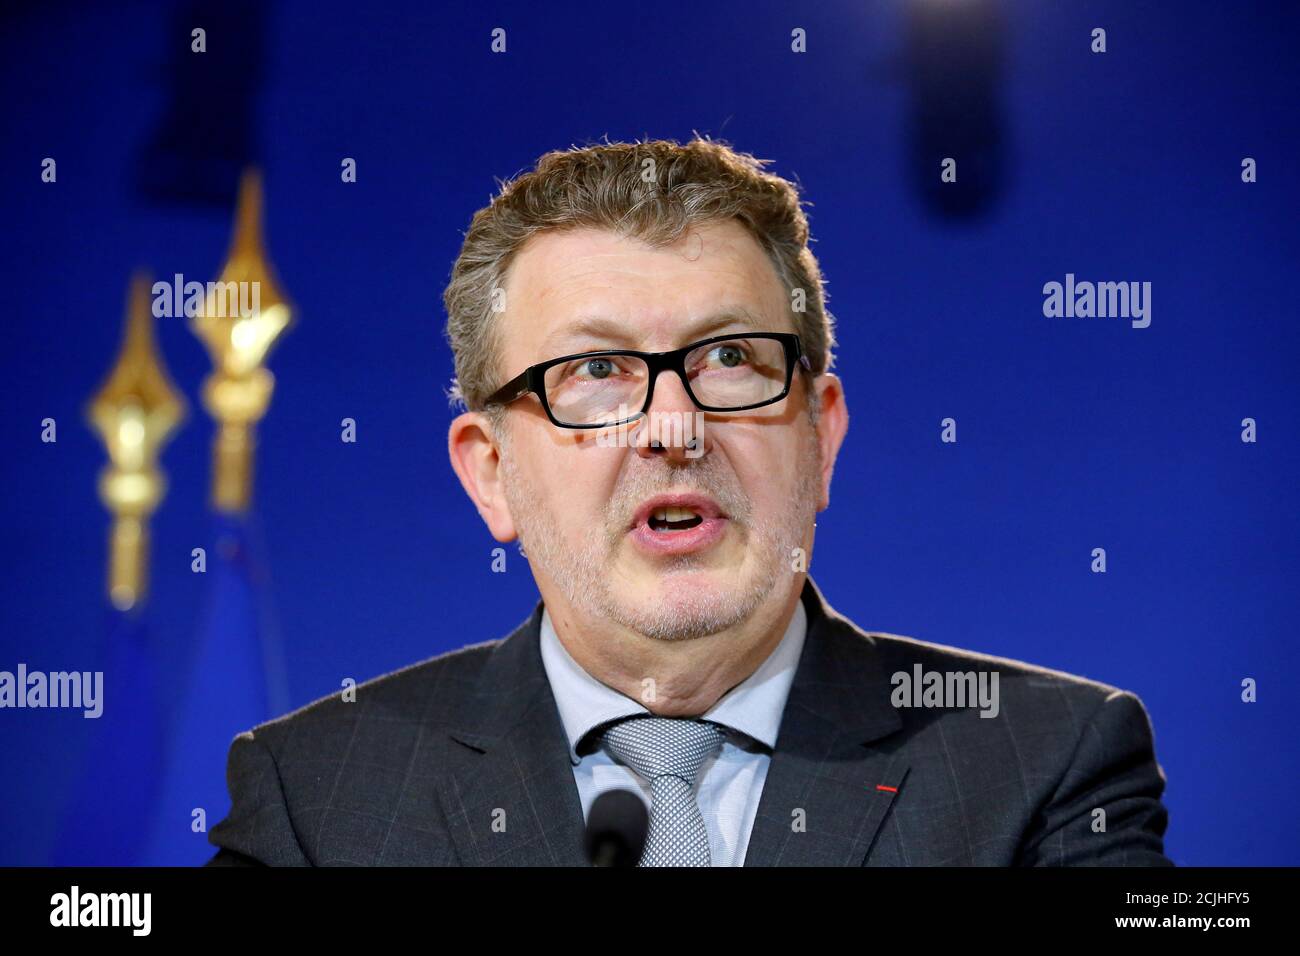 Head of Anticorruption Agency Charles Duchaine delivers a speech to inaugurate the French Anticorruption Agency at Bercy Economy ministry in Paris, France, March 23, 2017. The French anti corruption agency is a public organization focusing on business activity, the latest move in government efforts to fight corruption. REUTERS/Francois Mori/Pool Stock Photo